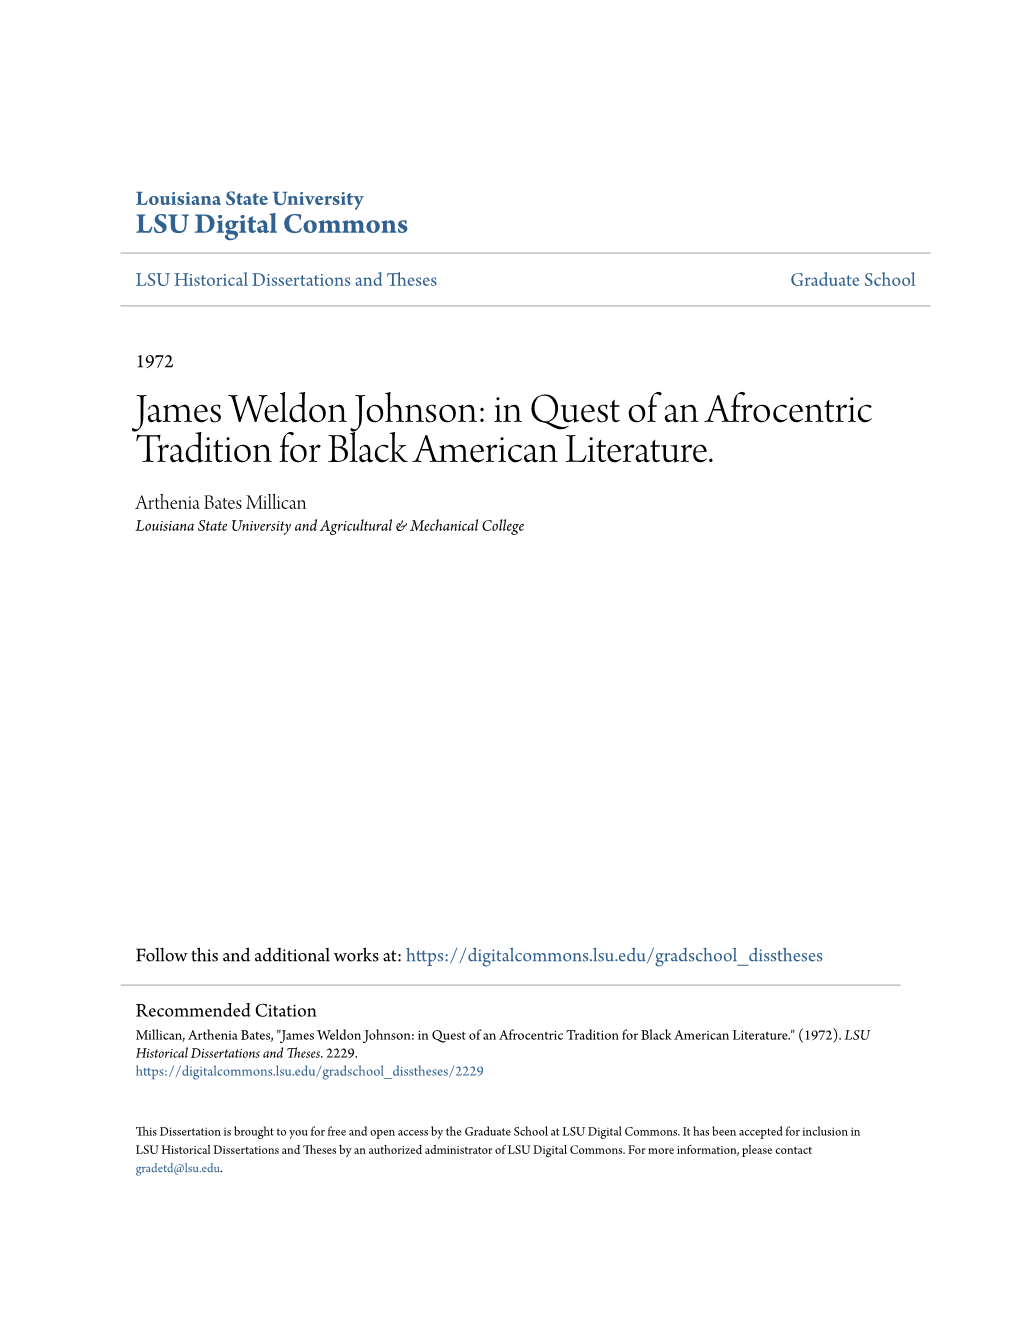 James Weldon Johnson: in Quest of an Afrocentric Tradition for Black American Literature